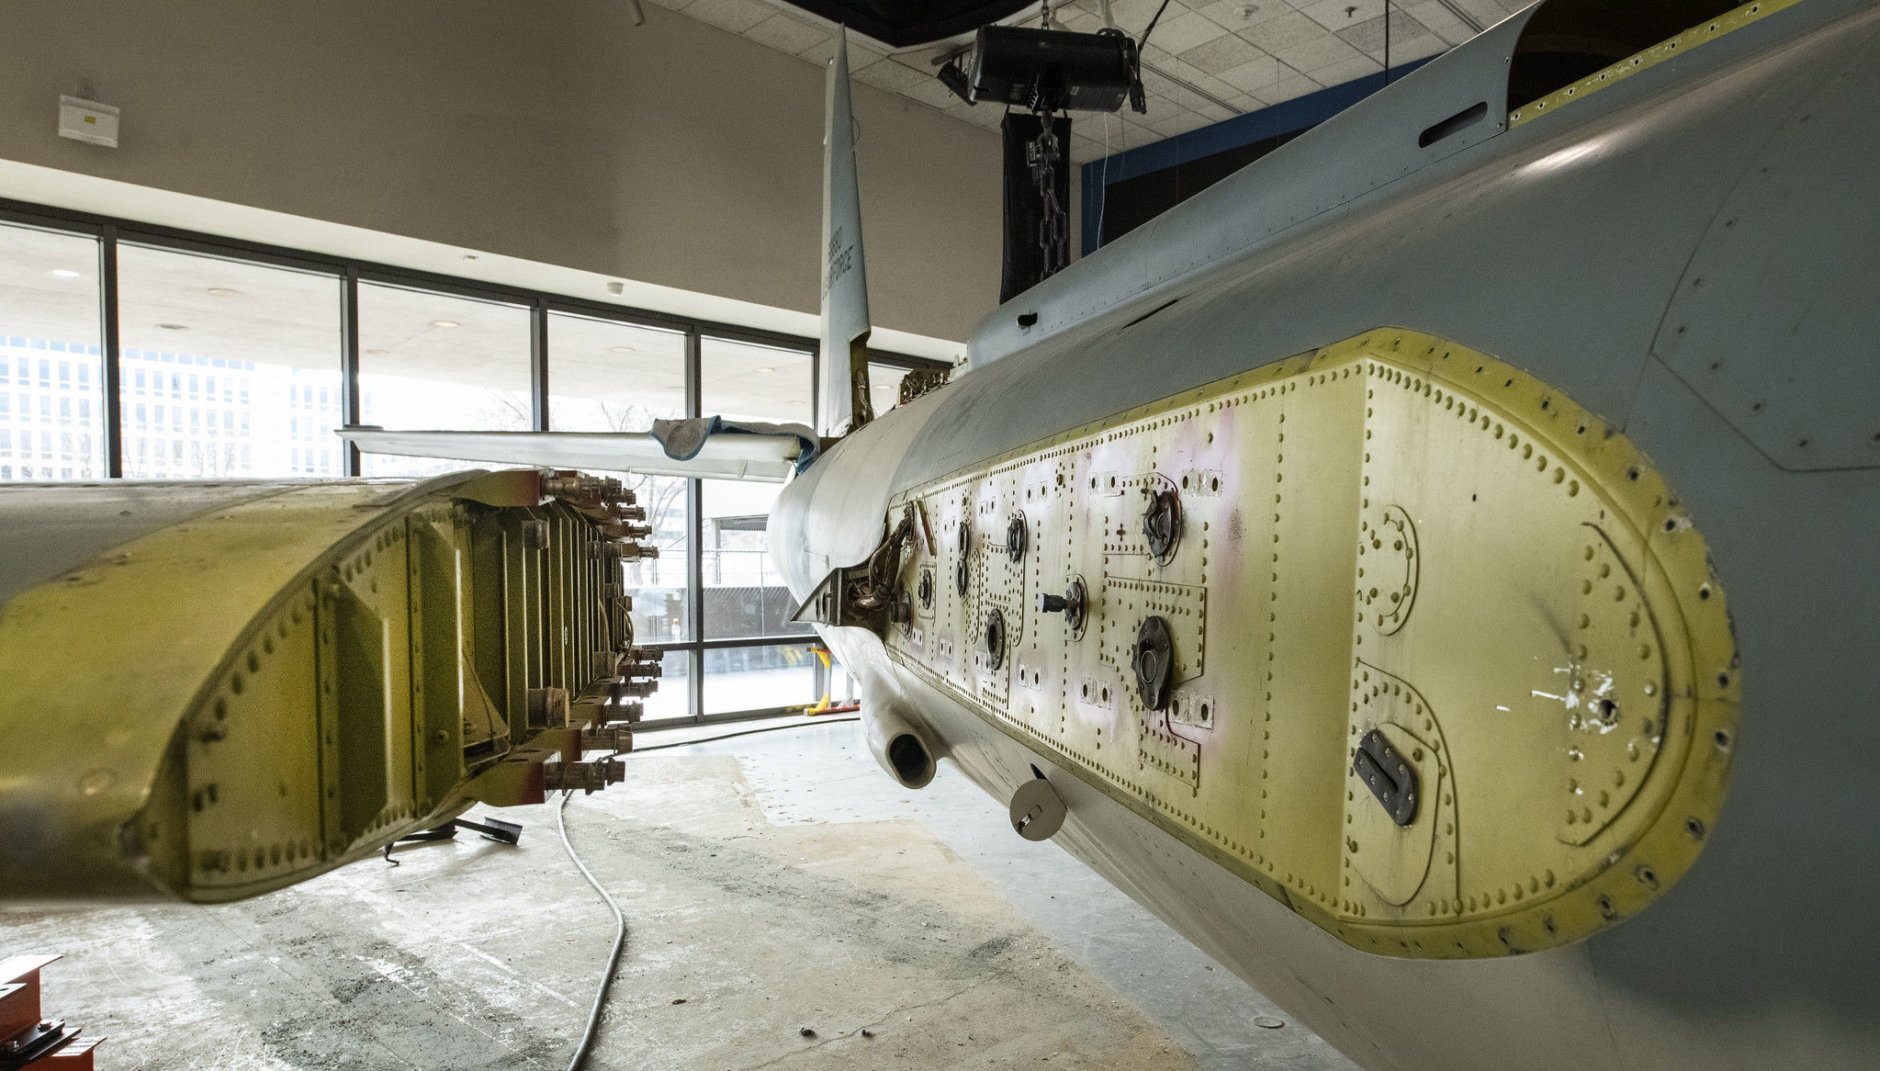 The right wing is unbolted and separated from the fuselage of the Lockheed U-2 aircraft after it was lowered from the ceiling in the closed Looking at Earth gallery in the National Air and Space Museum in Washington, DC, February 19 2019. (Smithsonian photo by Jim Preston)  Material is subject to Smithsonian Terms of Use. Should you wish to use National Air and Space material in any medium, please submit an Application for Permission to Reproduce NASM Material, available at:  https://airandspace.si.edu/permissions